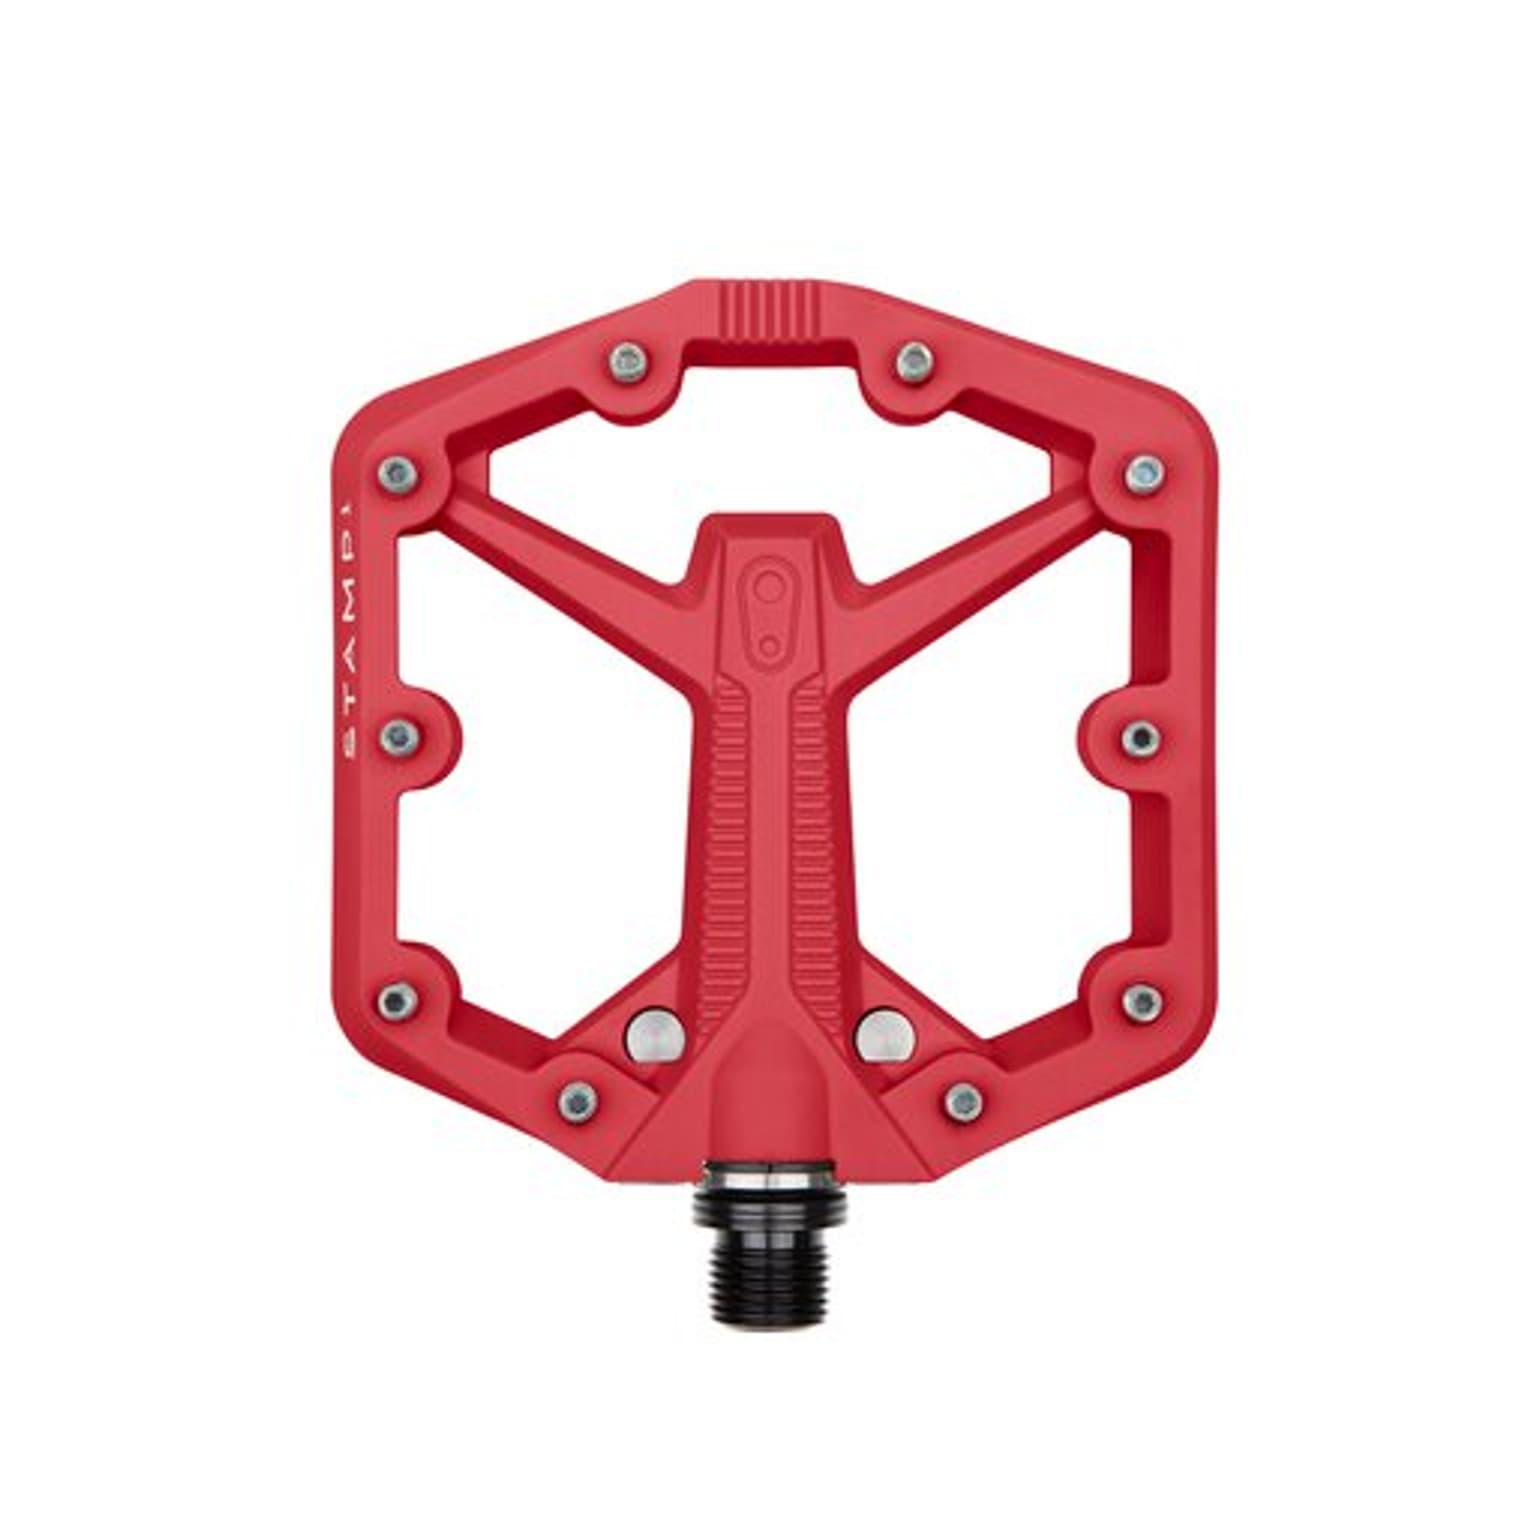 crankbrothers crankbrothers Pedal Stamp 1 small Pédales 1